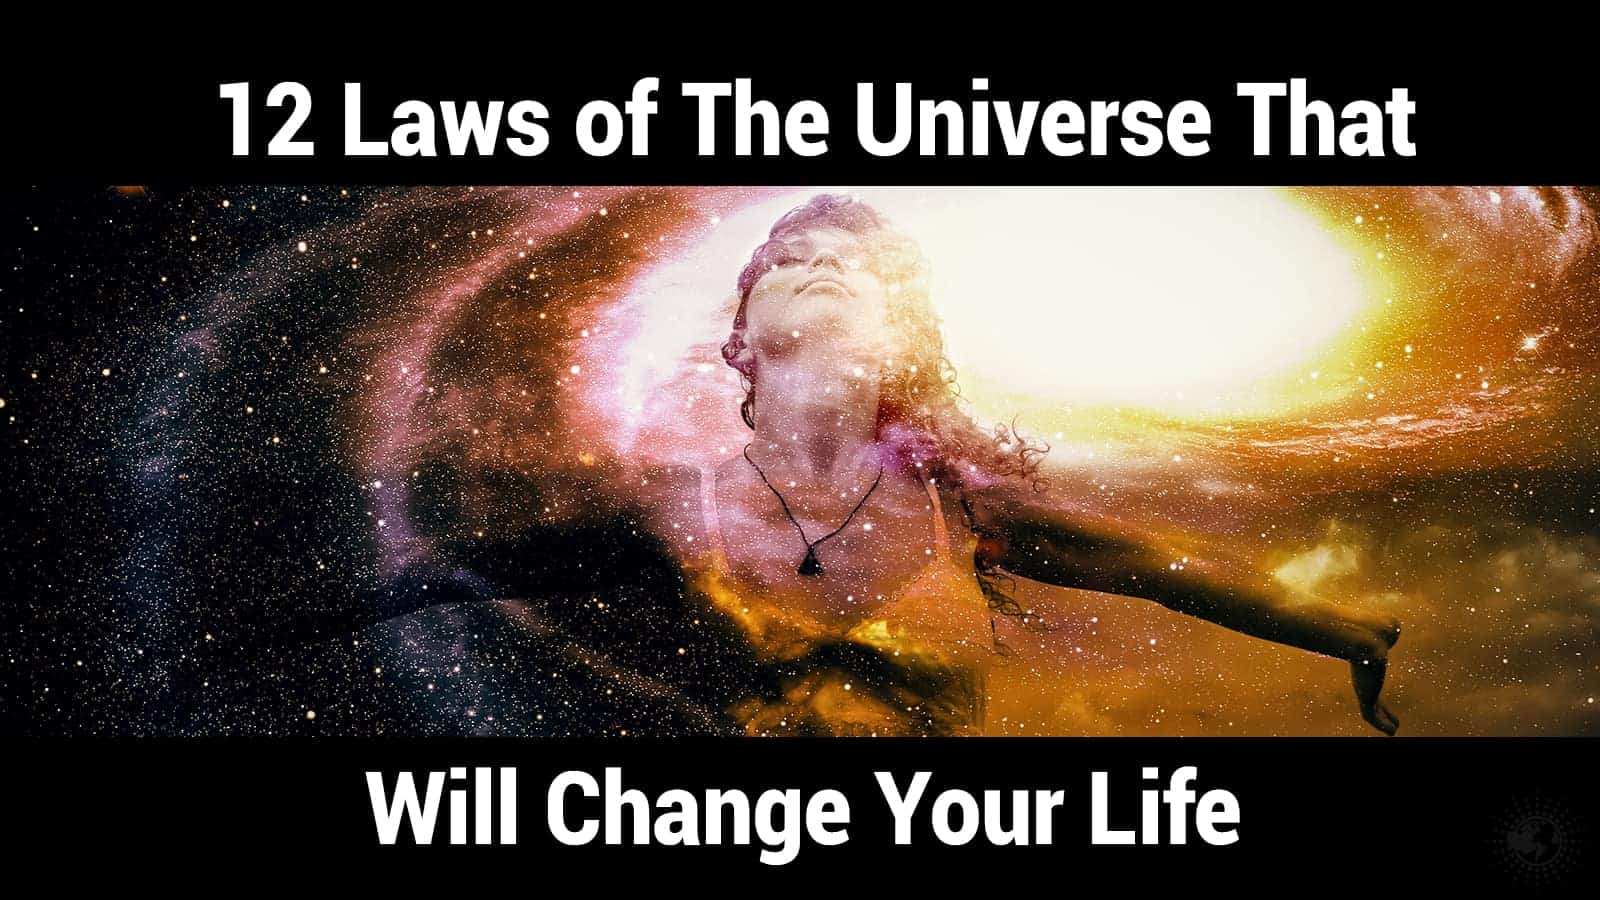 12 Laws of The Universe That Will Change Your Life